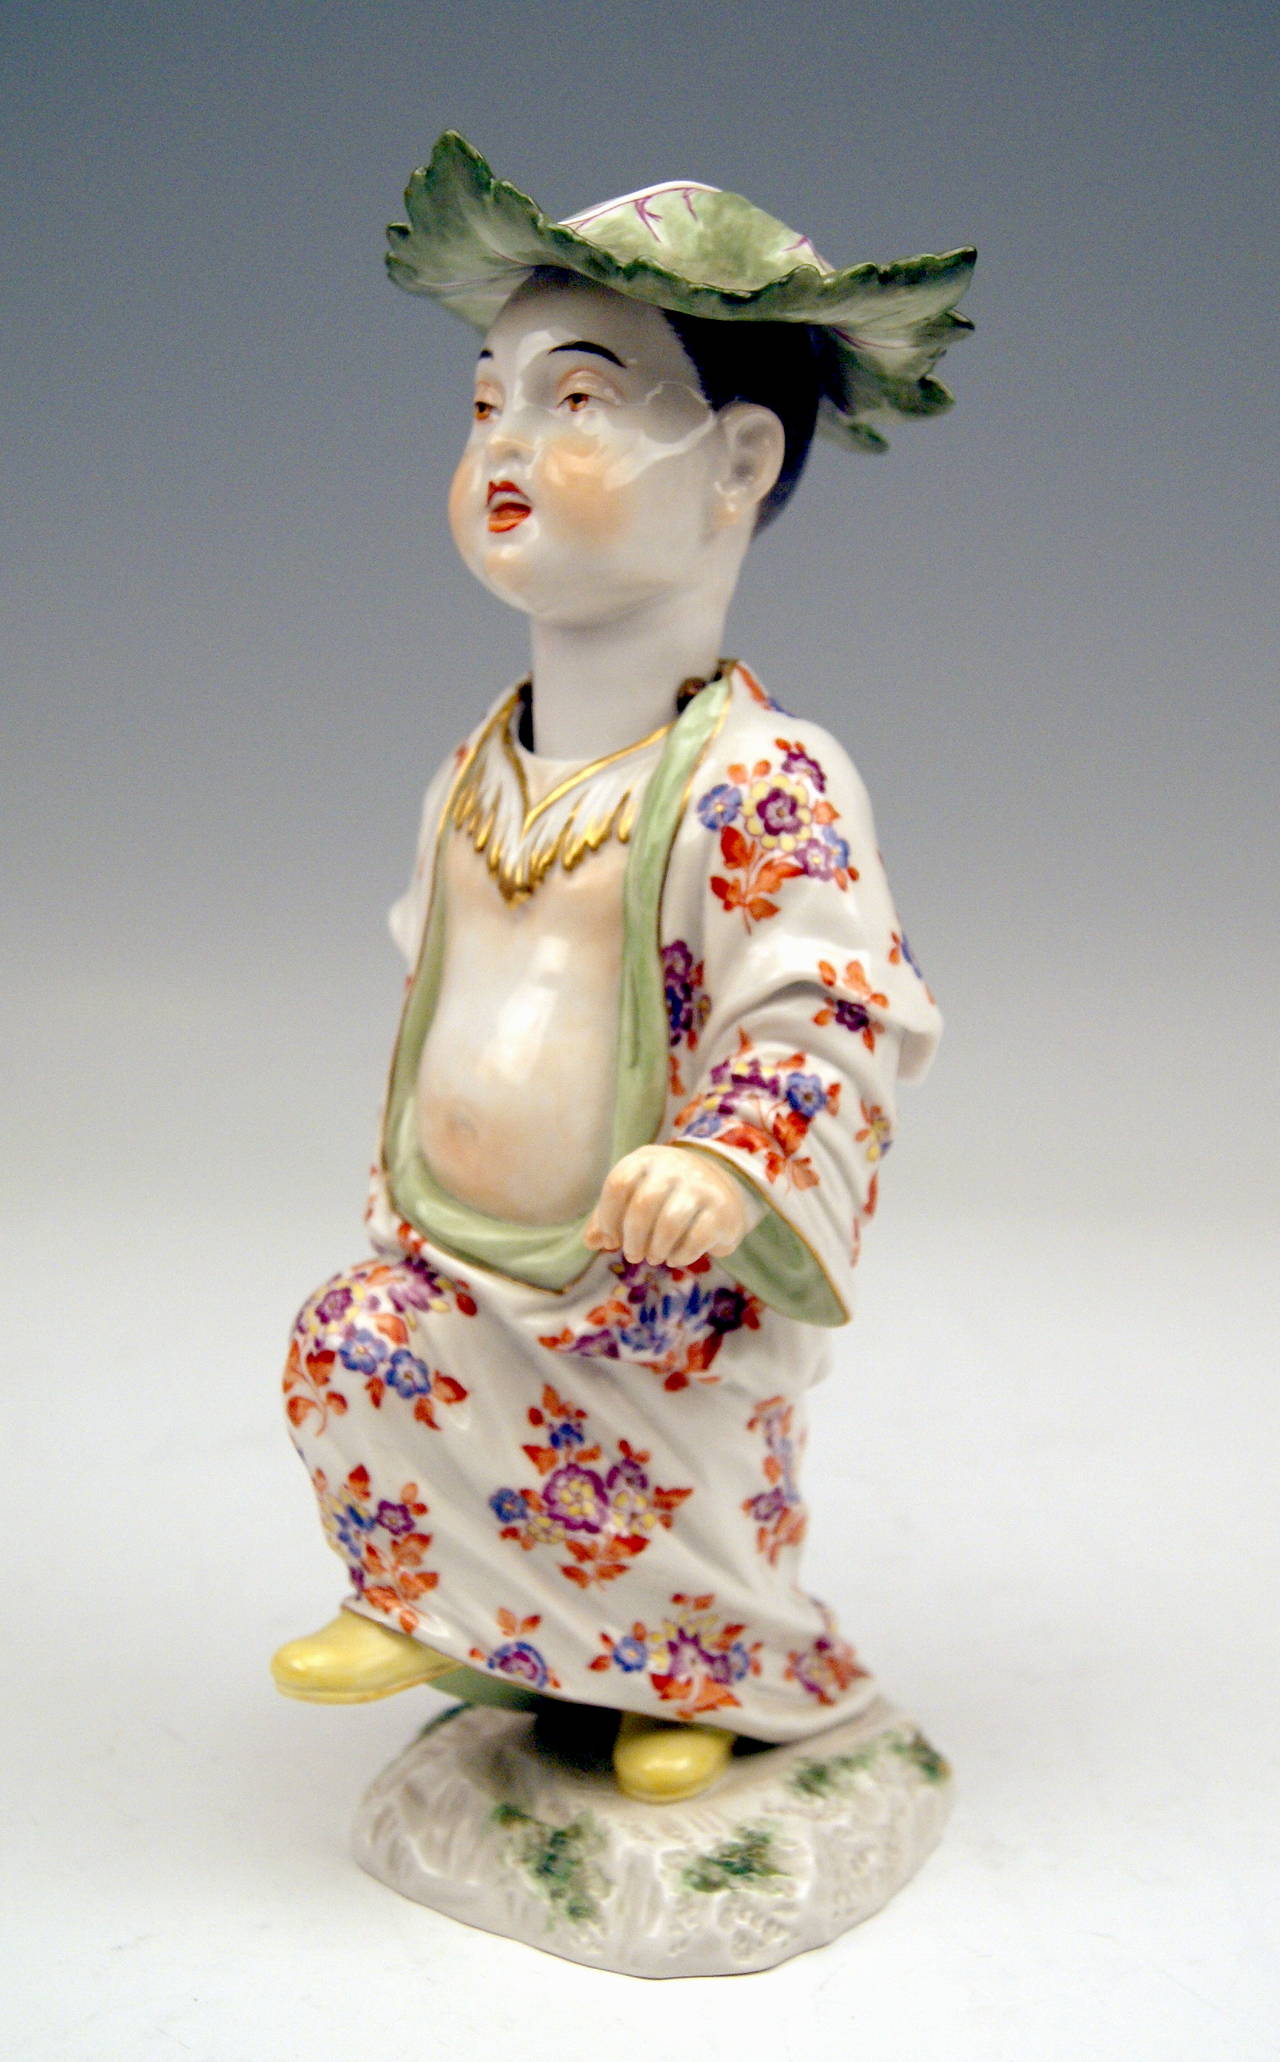 20th Century Meissen Chinese Boy with Hat made of Cabbages' Leaves Kändler made 20th century